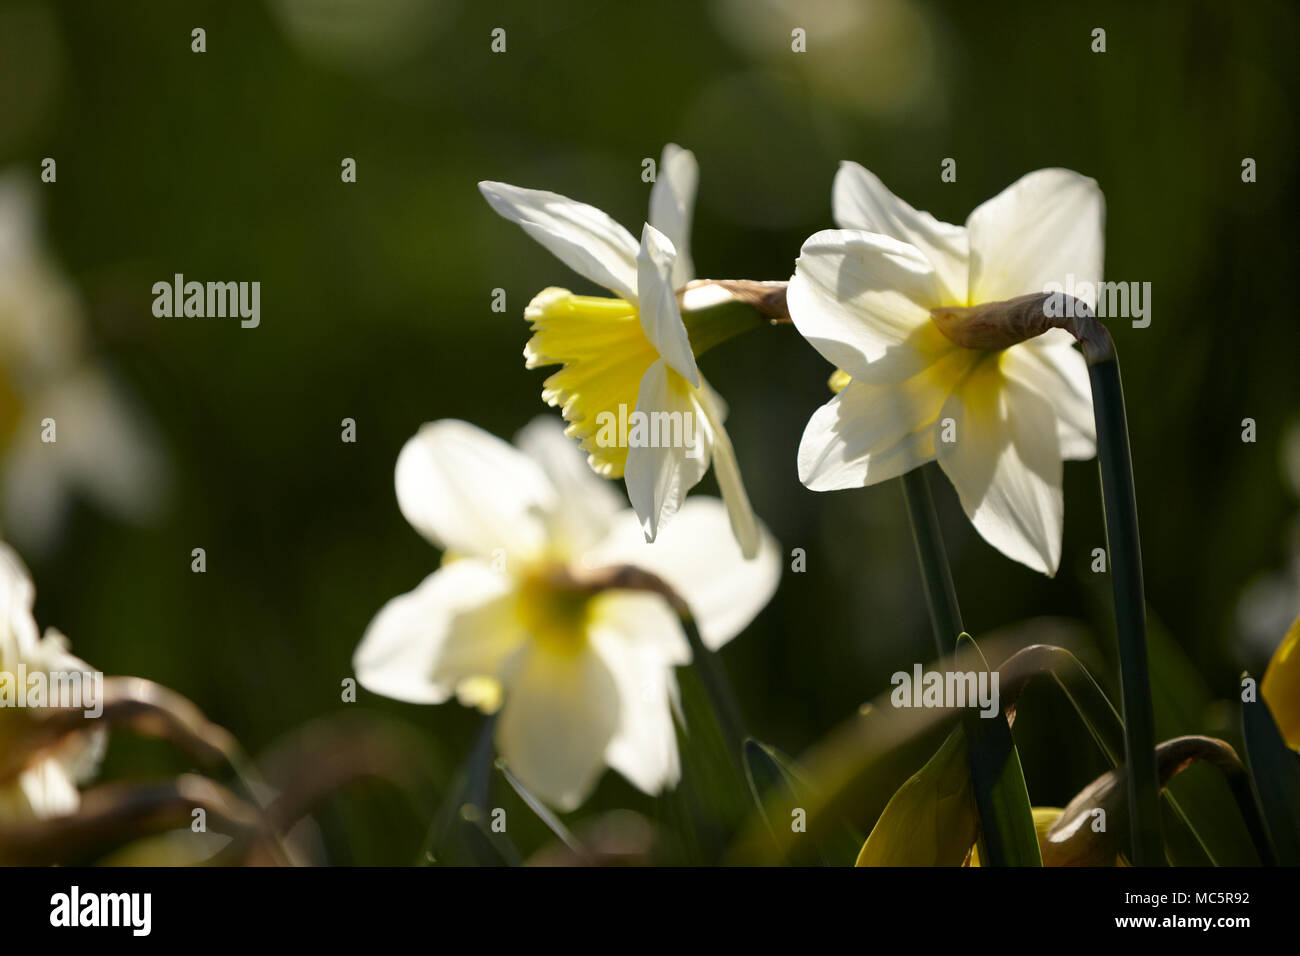 Daffodil Narcissus Flowers Stock Photo